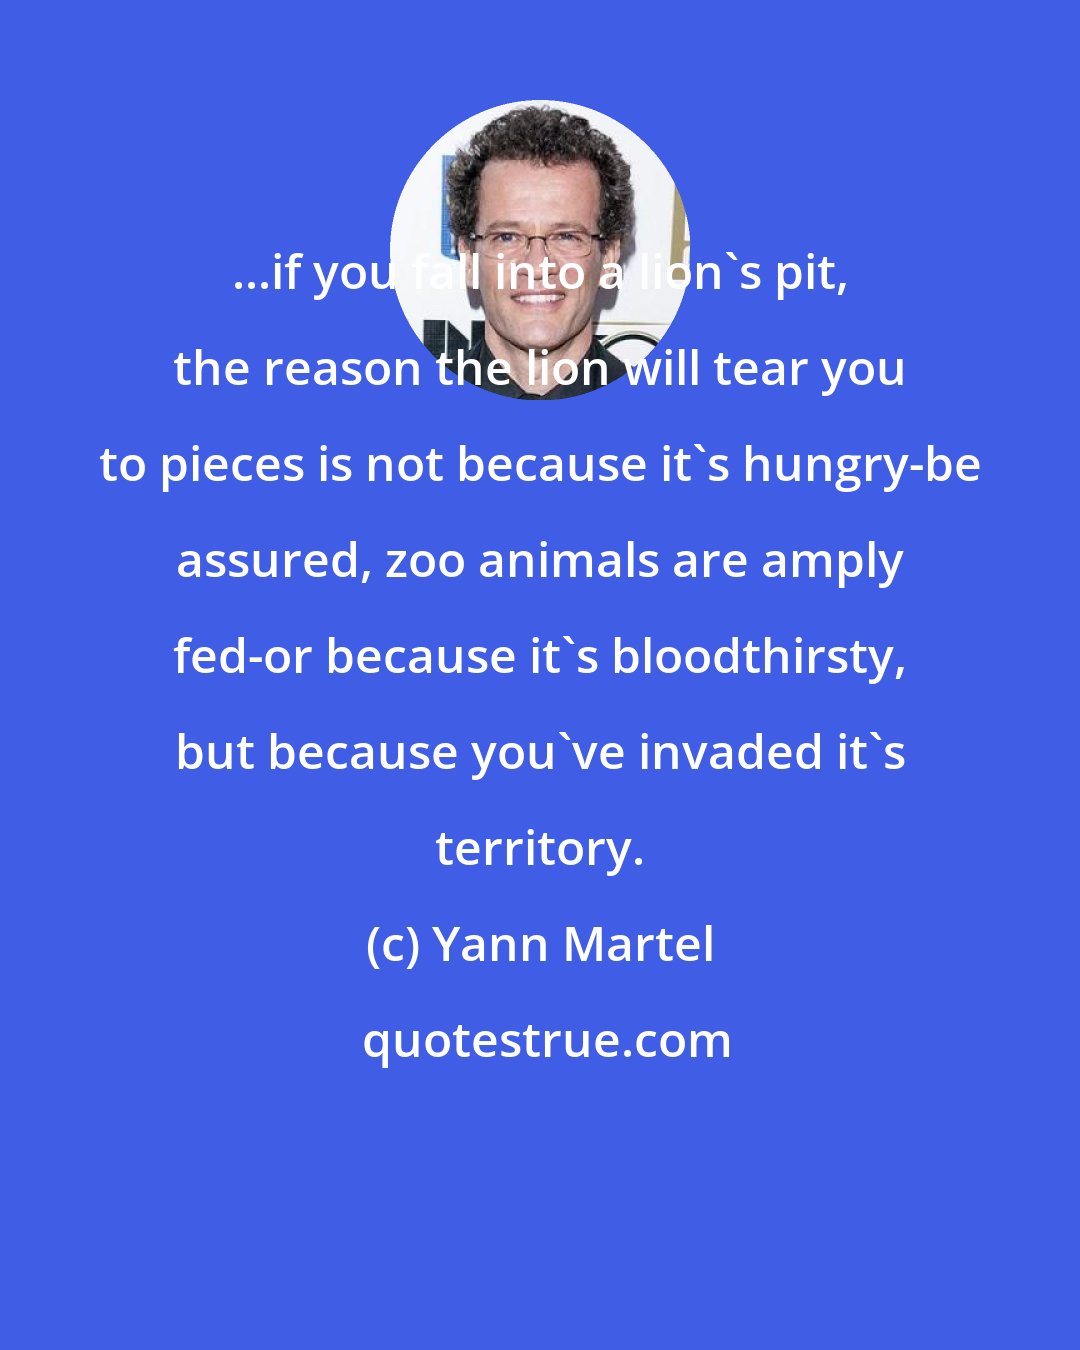 Yann Martel: ...if you fall into a lion's pit, the reason the lion will tear you to pieces is not because it's hungry-be assured, zoo animals are amply fed-or because it's bloodthirsty, but because you've invaded it's territory.